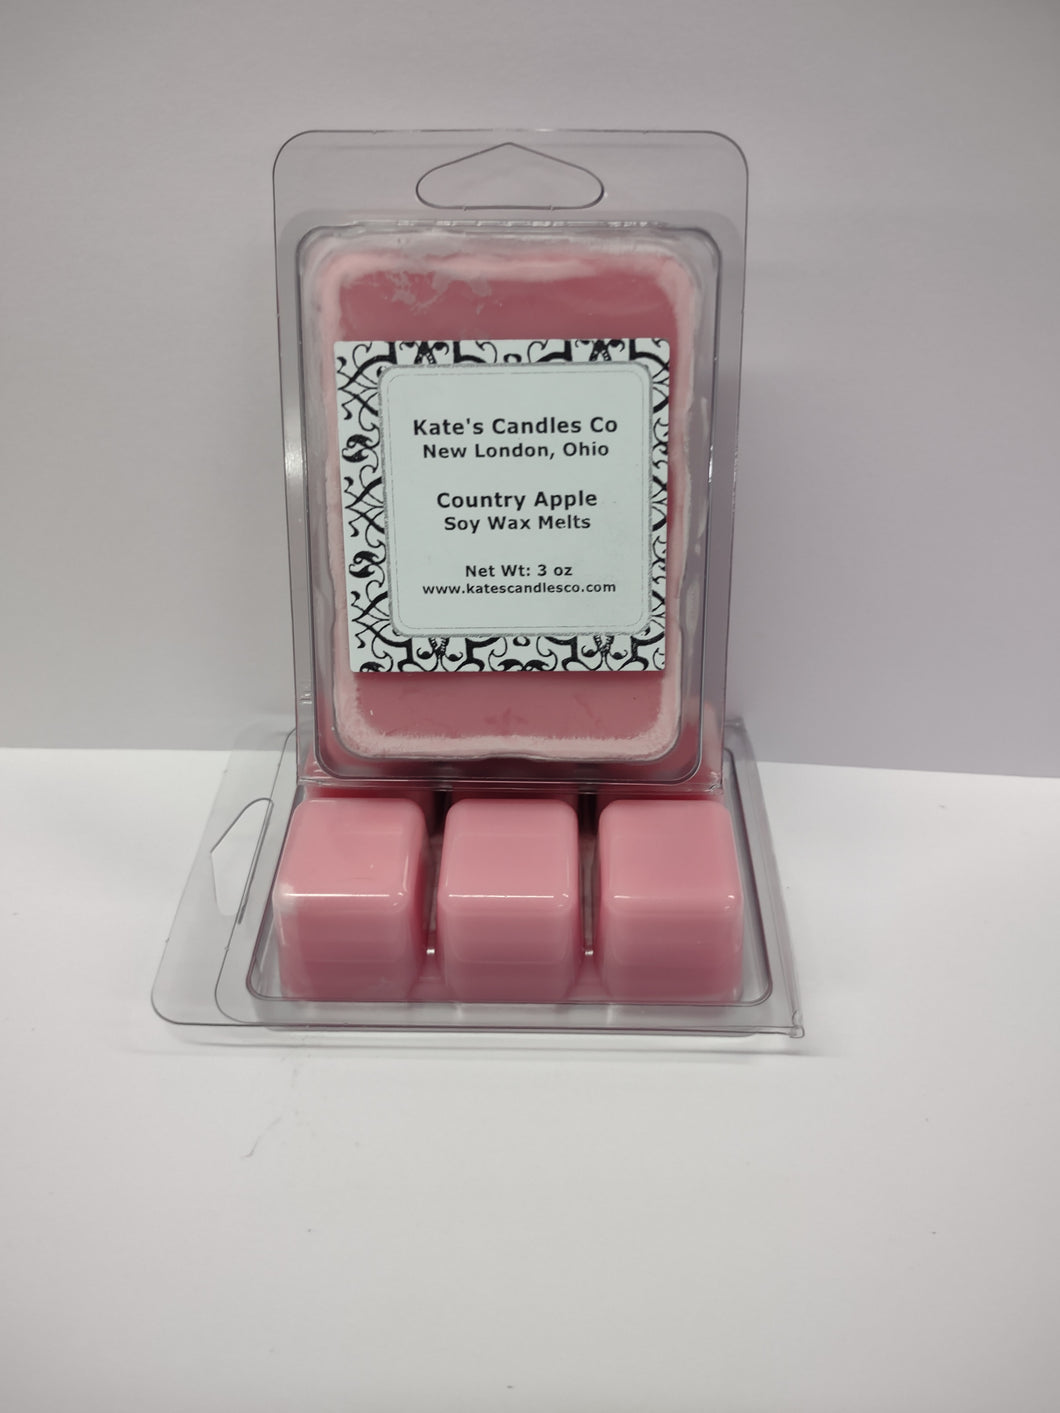 Country Apple Soy Wax Melts - Kate's Candles Co.